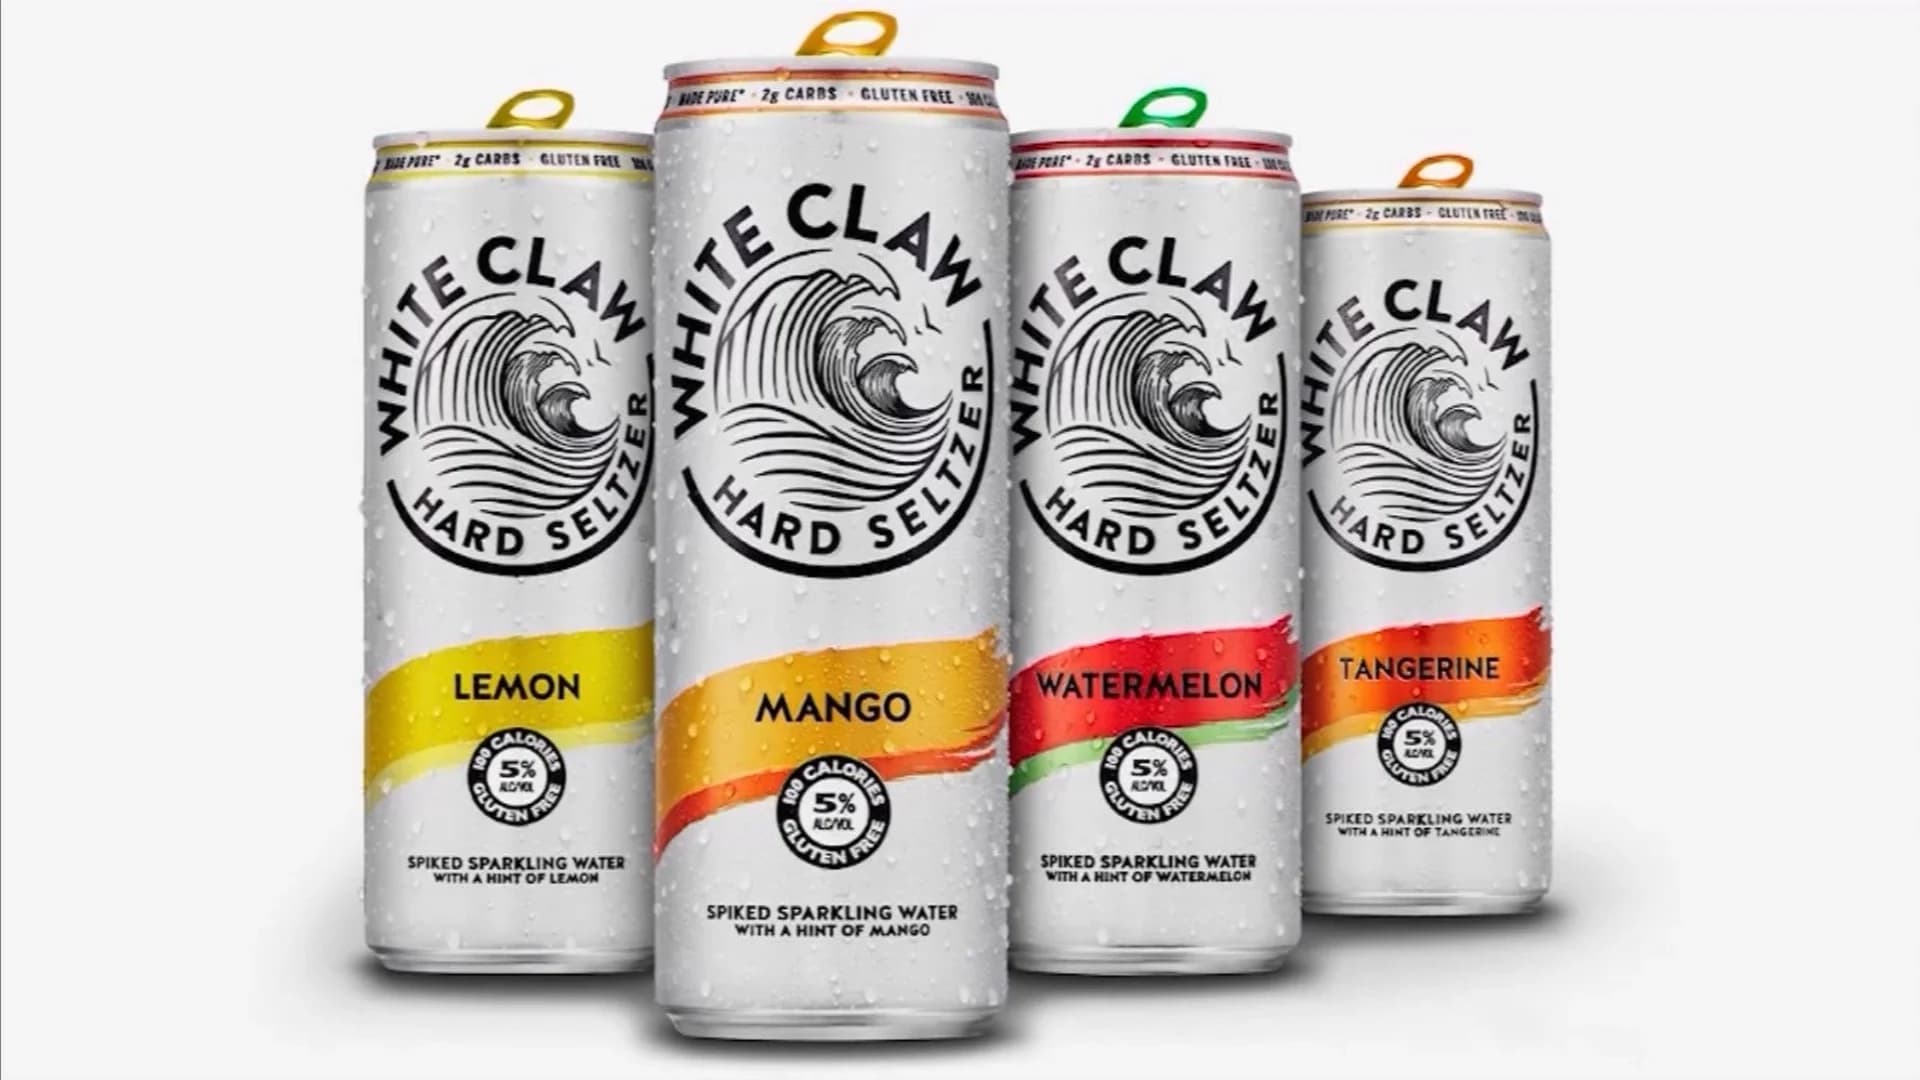 White Claw set to launch 3 new flavors